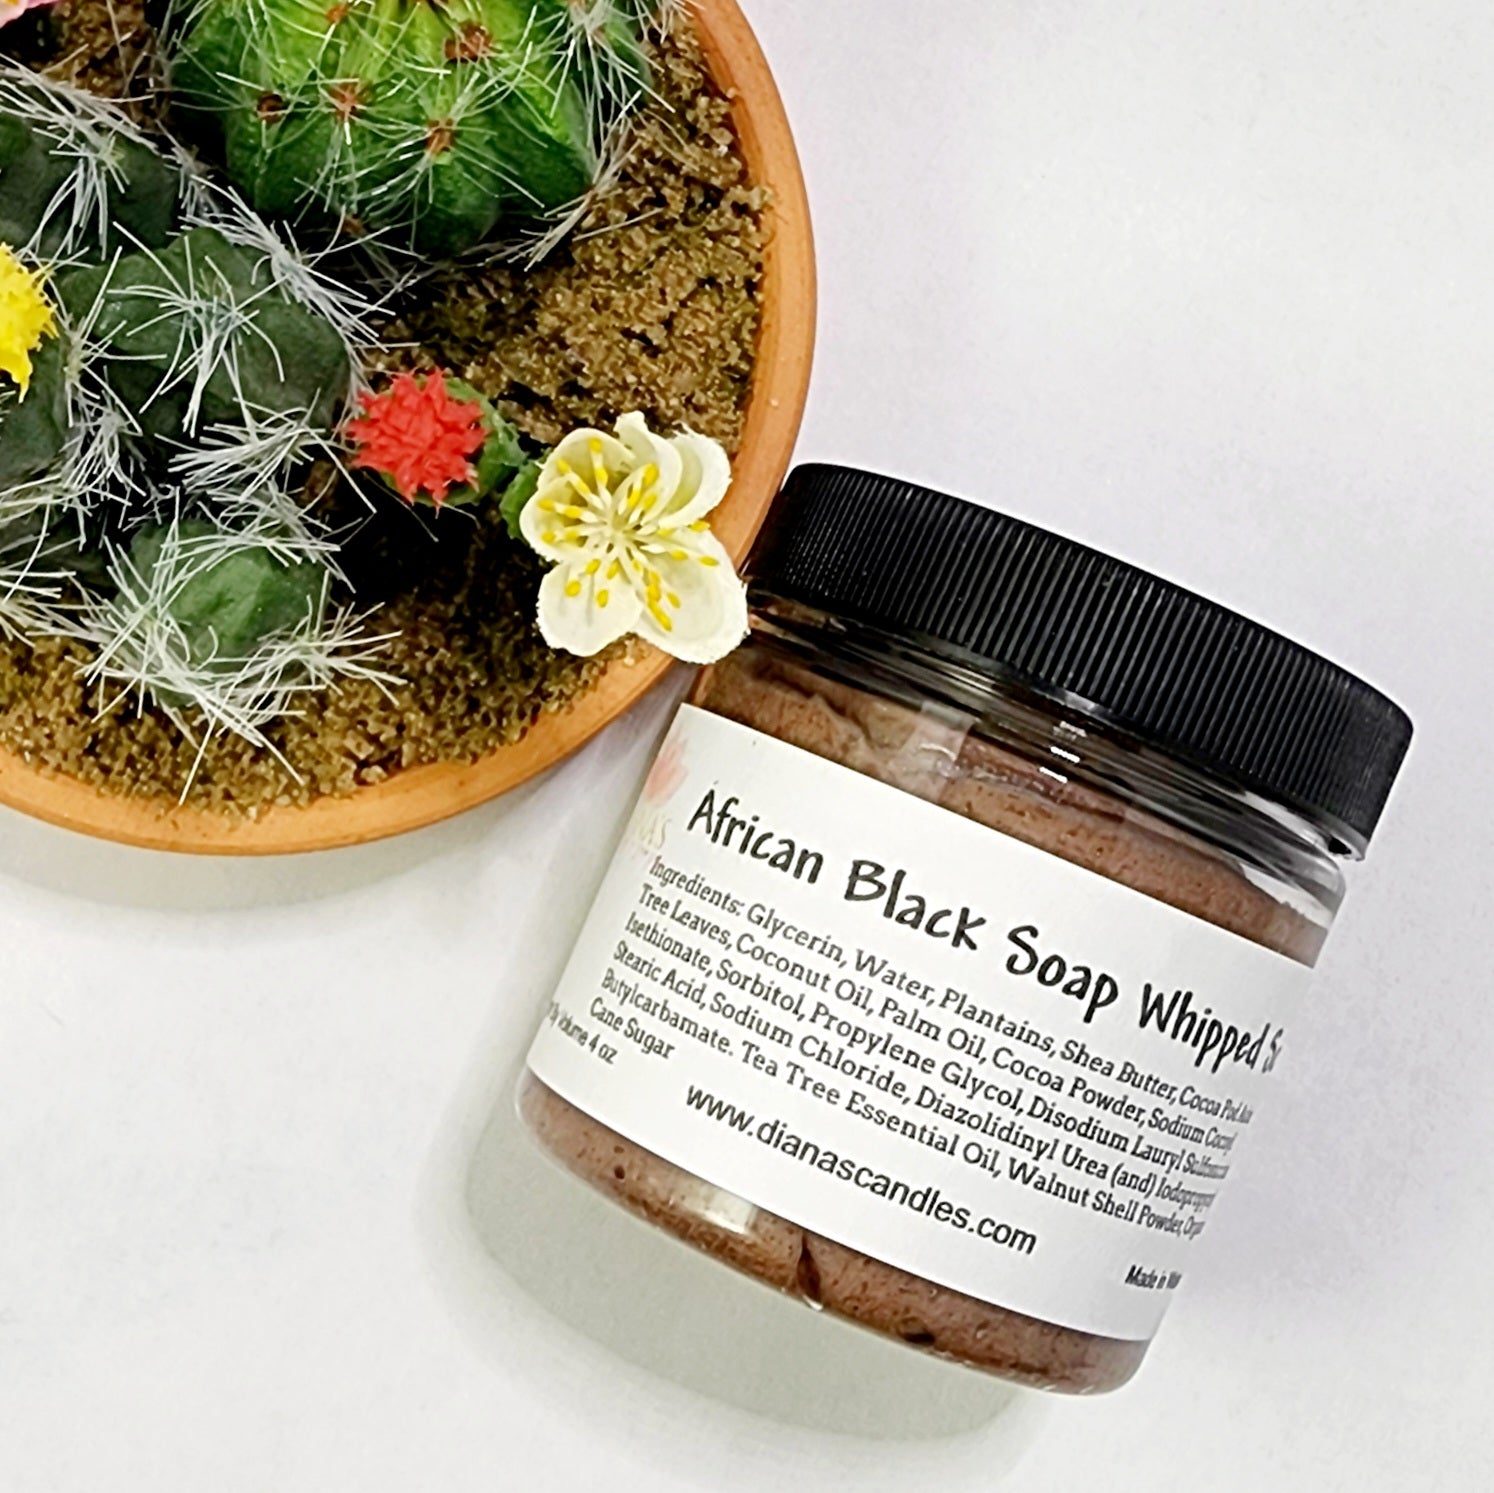 African Black Soap Scrub - Diana's Candles and Soaps 